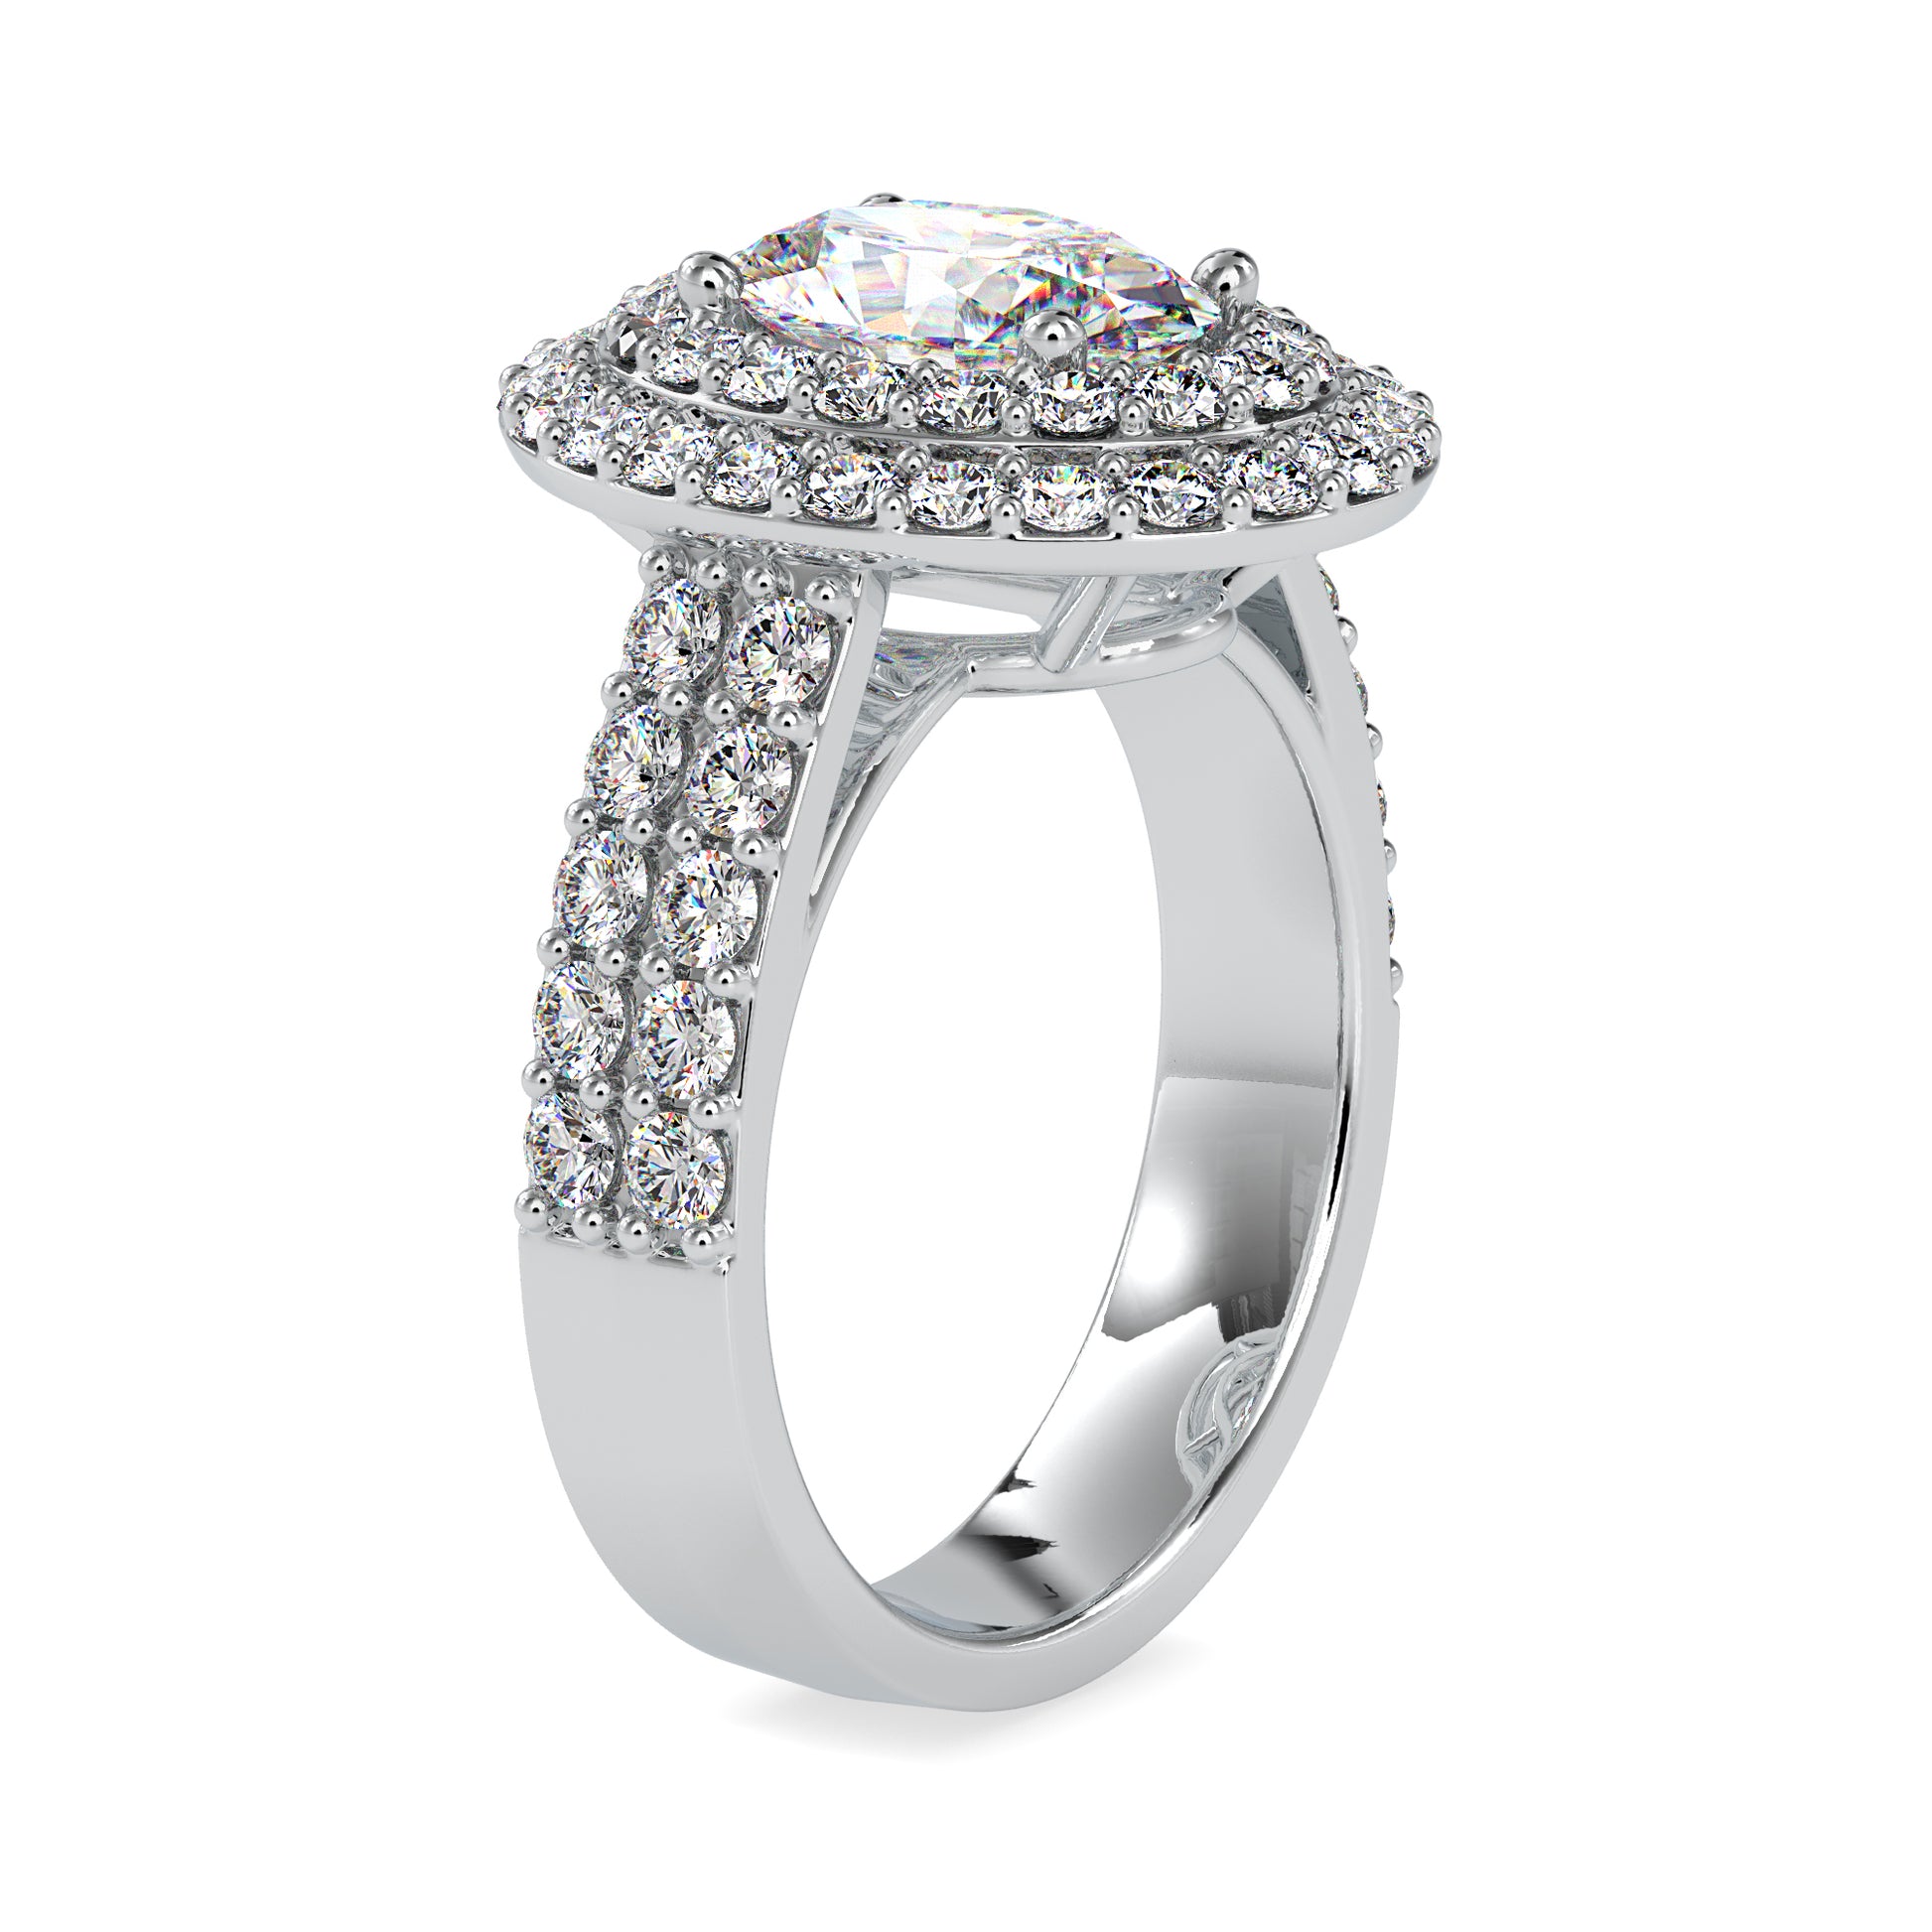 Moissanite diamond Halo Ring in Sterling Silver and Gold - 3.12 Ct - DOC0036